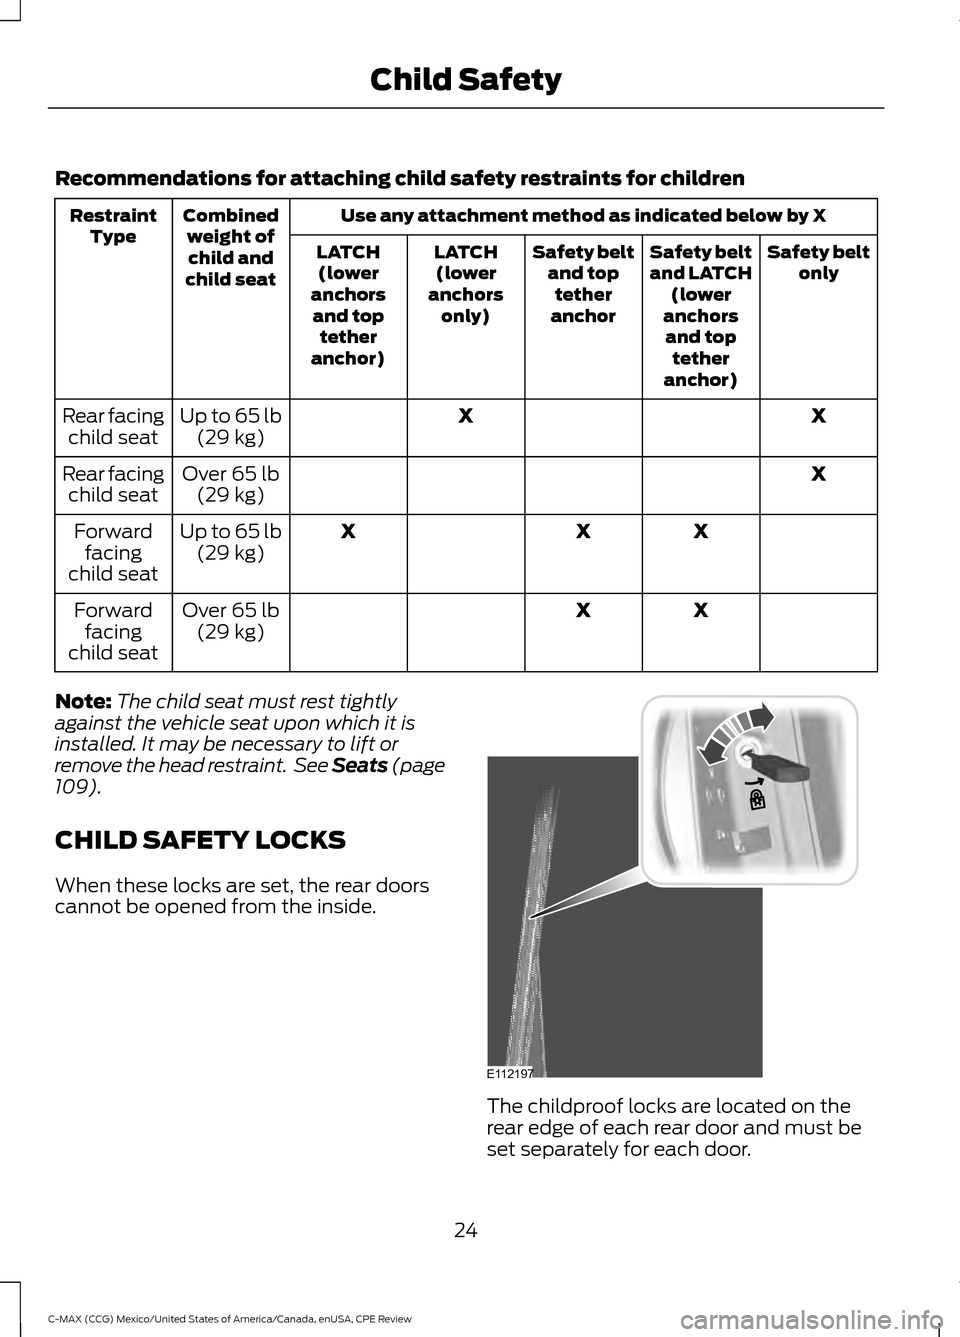 FORD C MAX HYBRID 2015 2.G Owners Manual Recommendations for attaching child safety restraints for children
Use any attachment method as indicated below by X
Combined
weight ofchild and
child seat
Restraint
Type Safety belt
only
Safety belt
